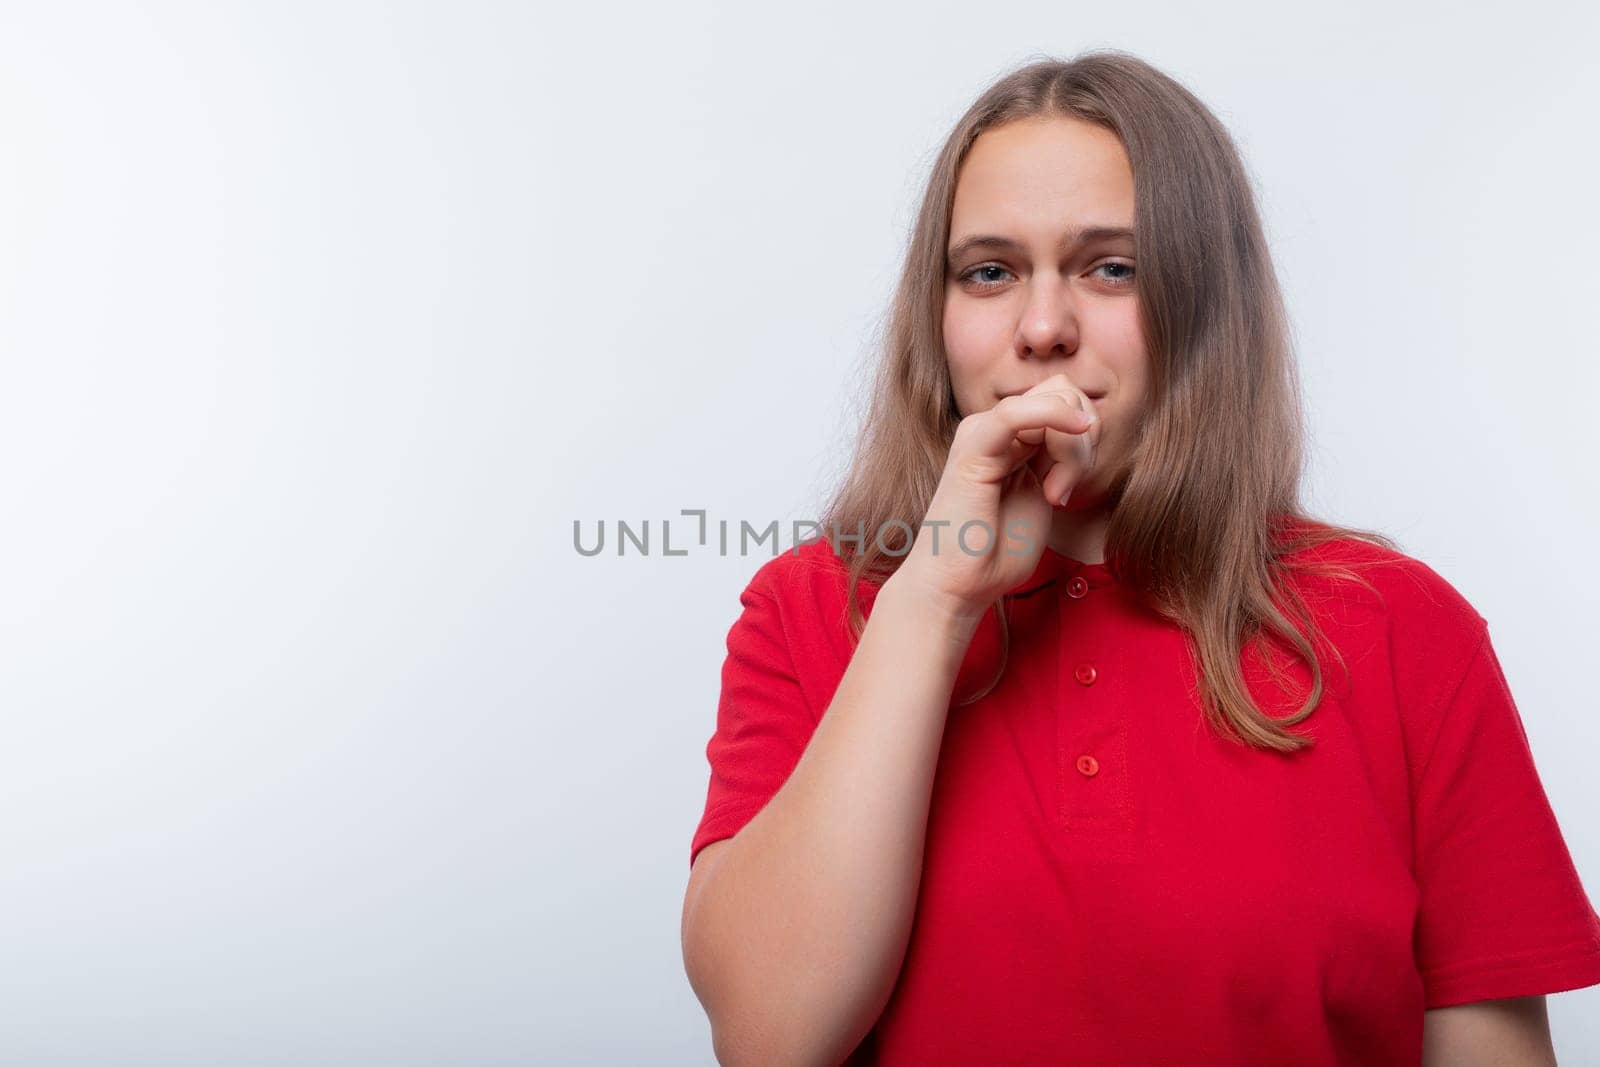 Caucasian girl with brown hair is wearing a red T-shirt by TRMK